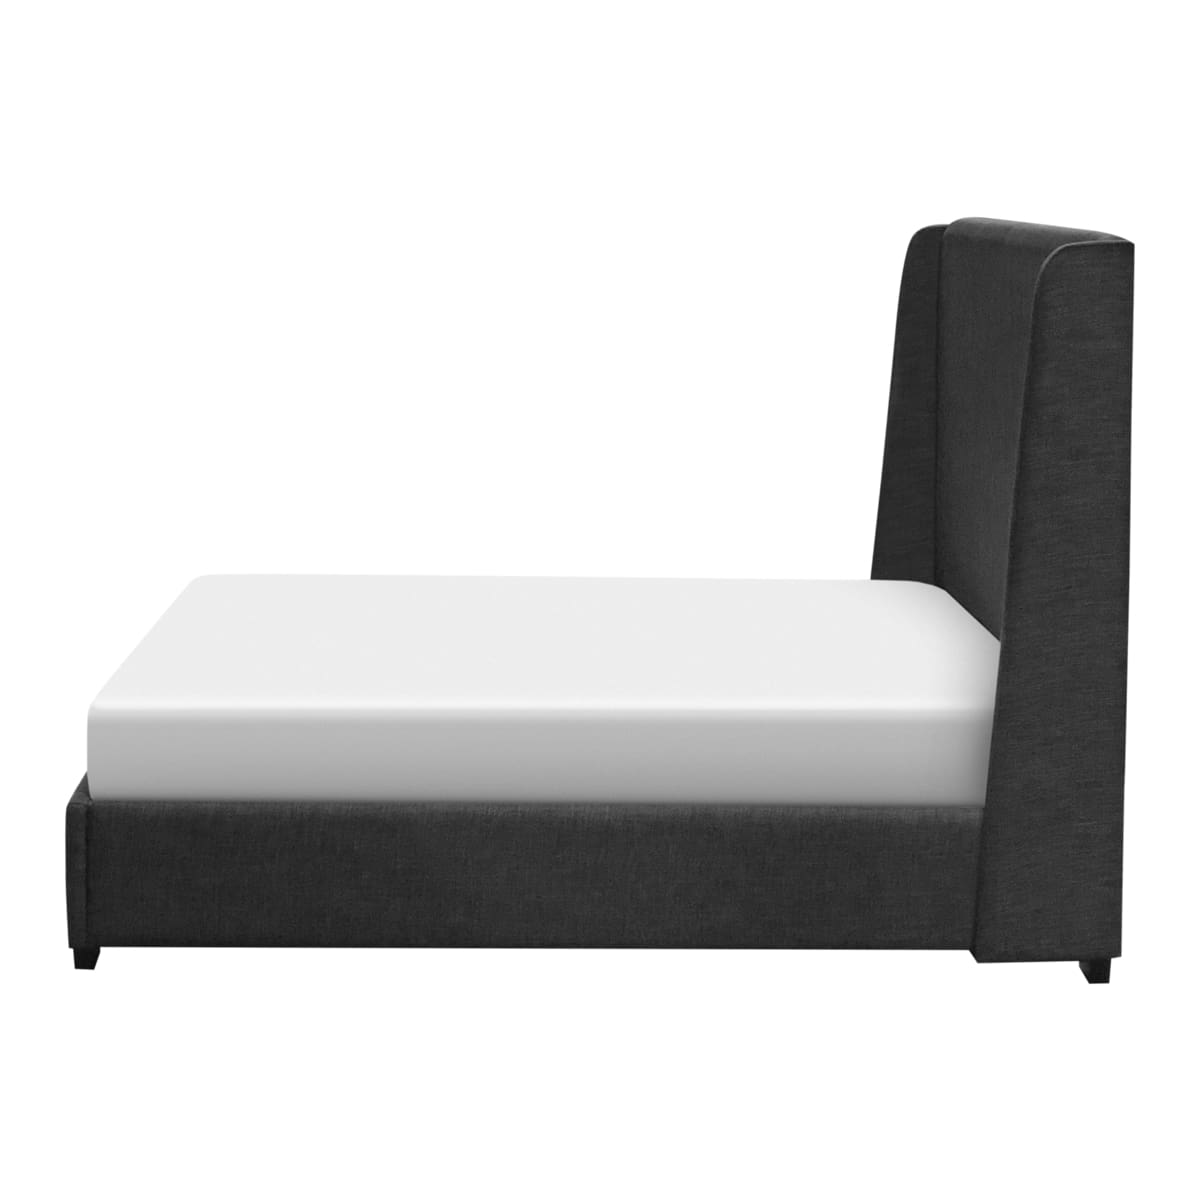 Abby Upholstery Bed - $1699.99 - BED